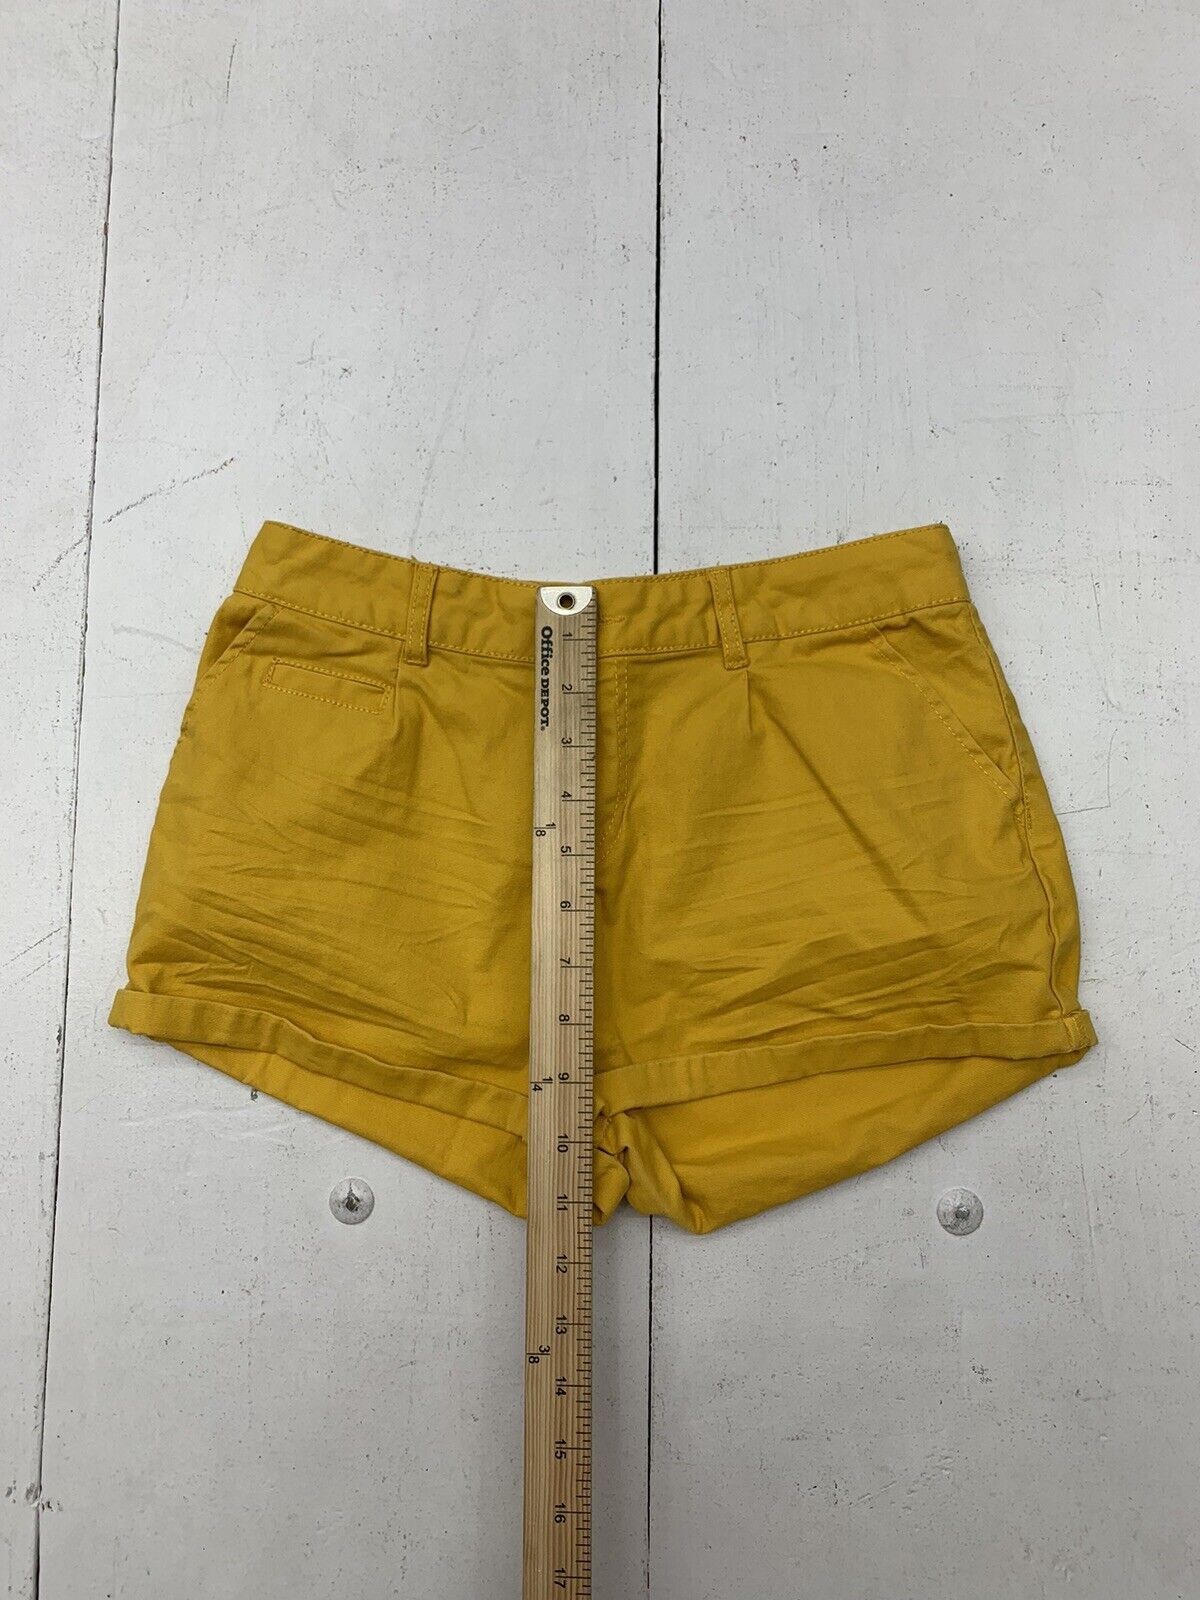 Ambiance Apparel Womens Yellow Shorts Size Small - beyond exchange